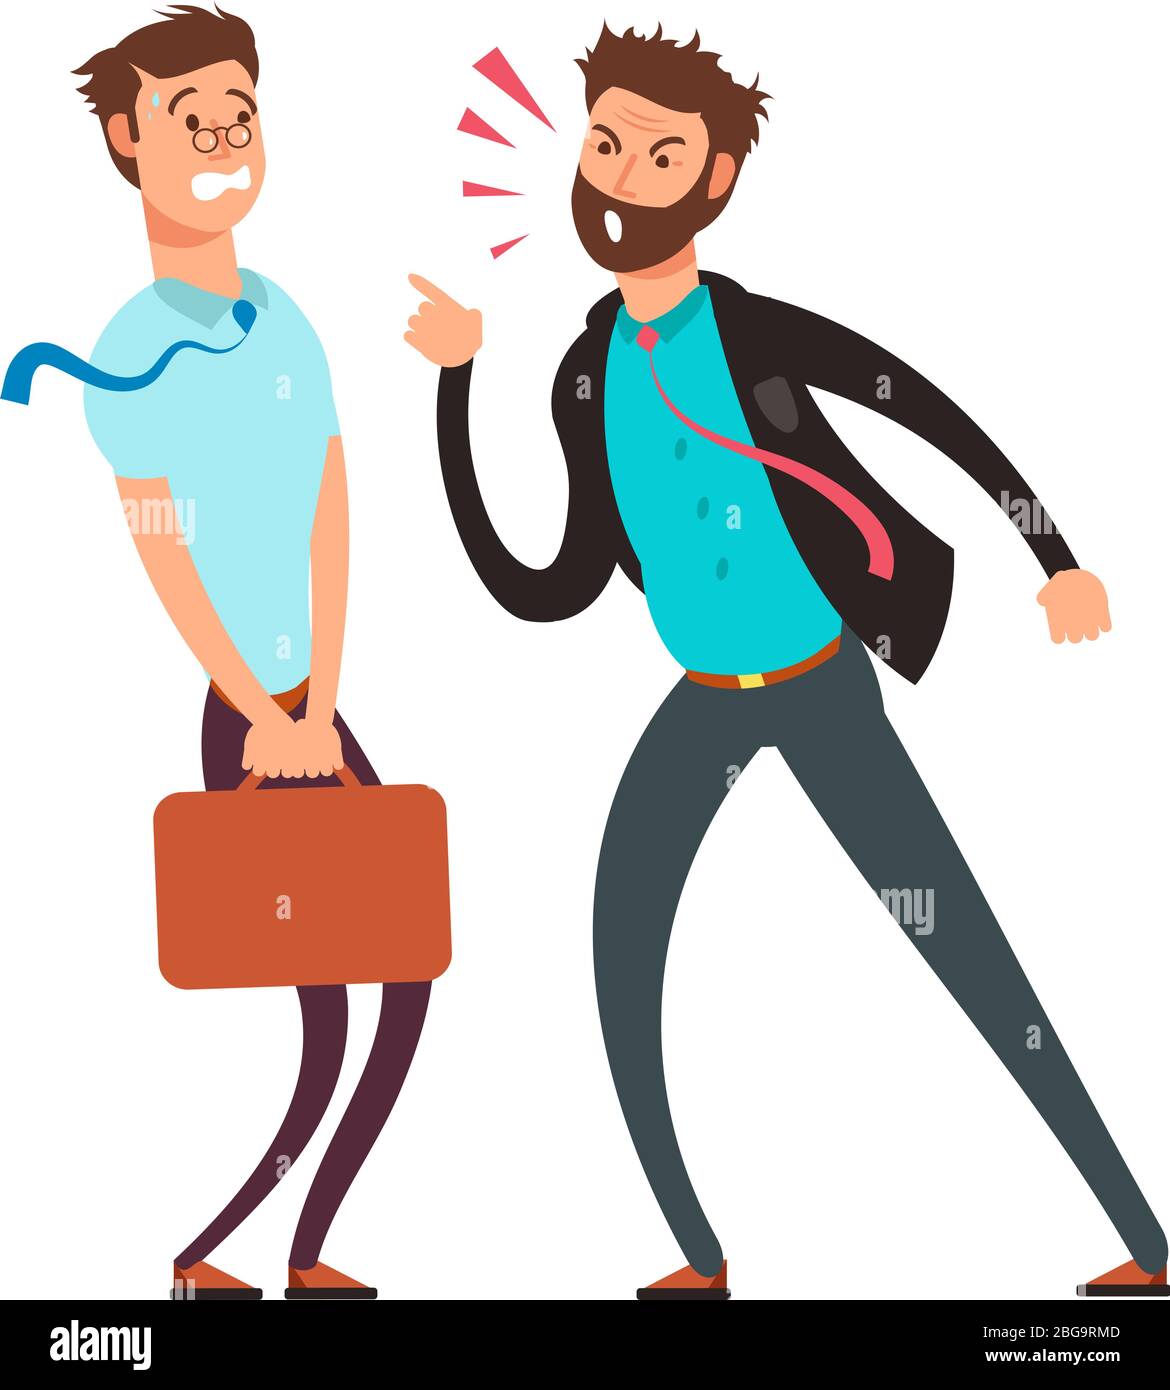 Big angry boss screaming out on employee. Cartoon business vector concept. Illustration of angry boss and employee worker Stock Vector